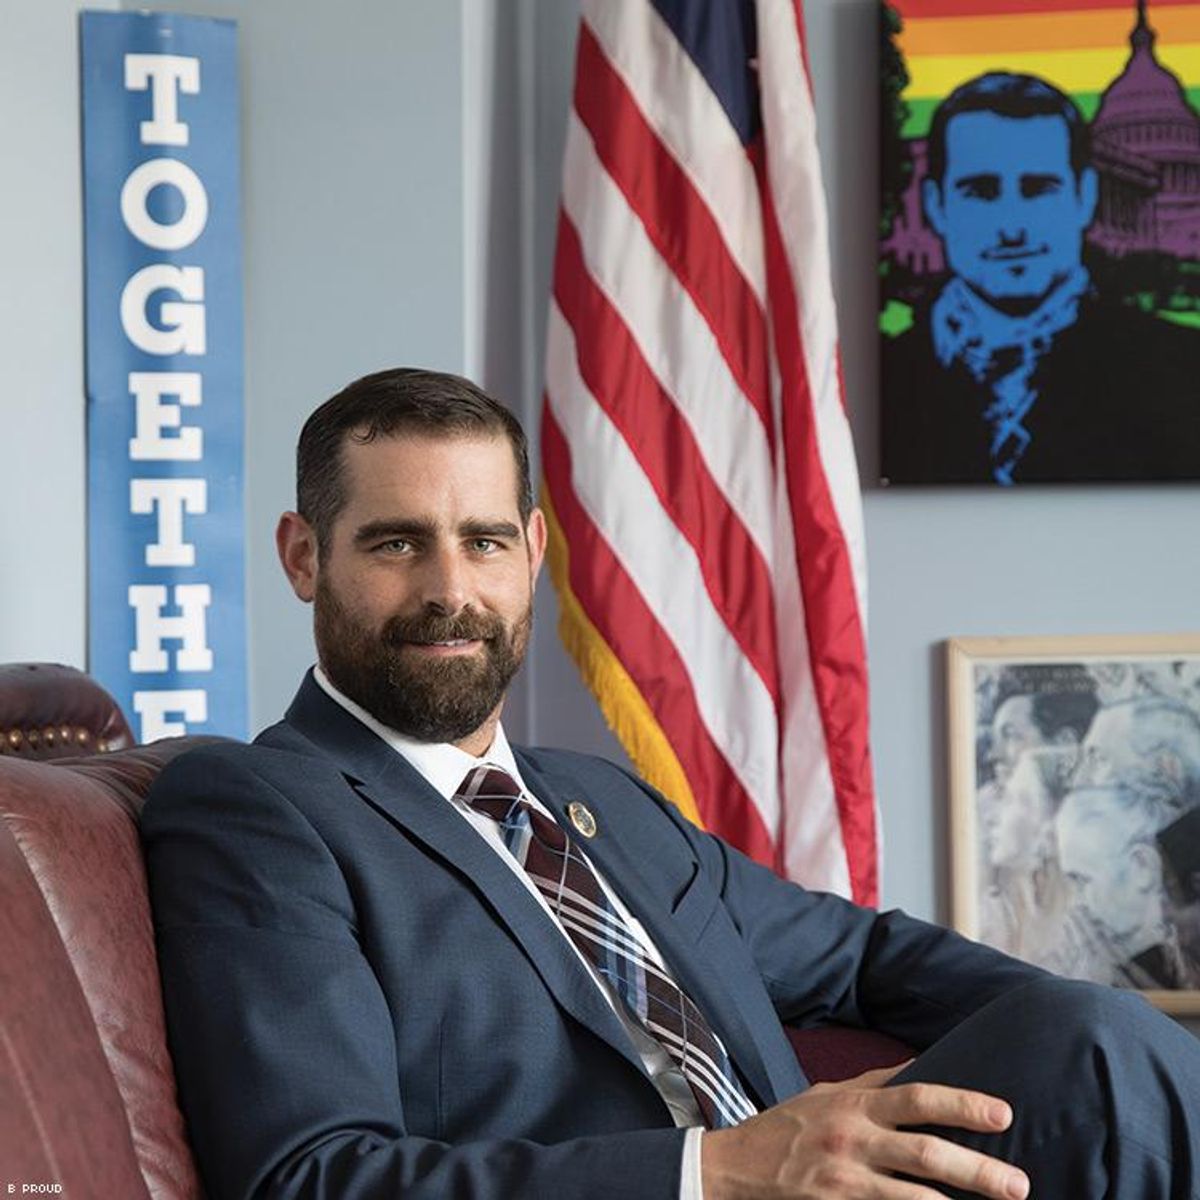 Brian Sims by B Proud